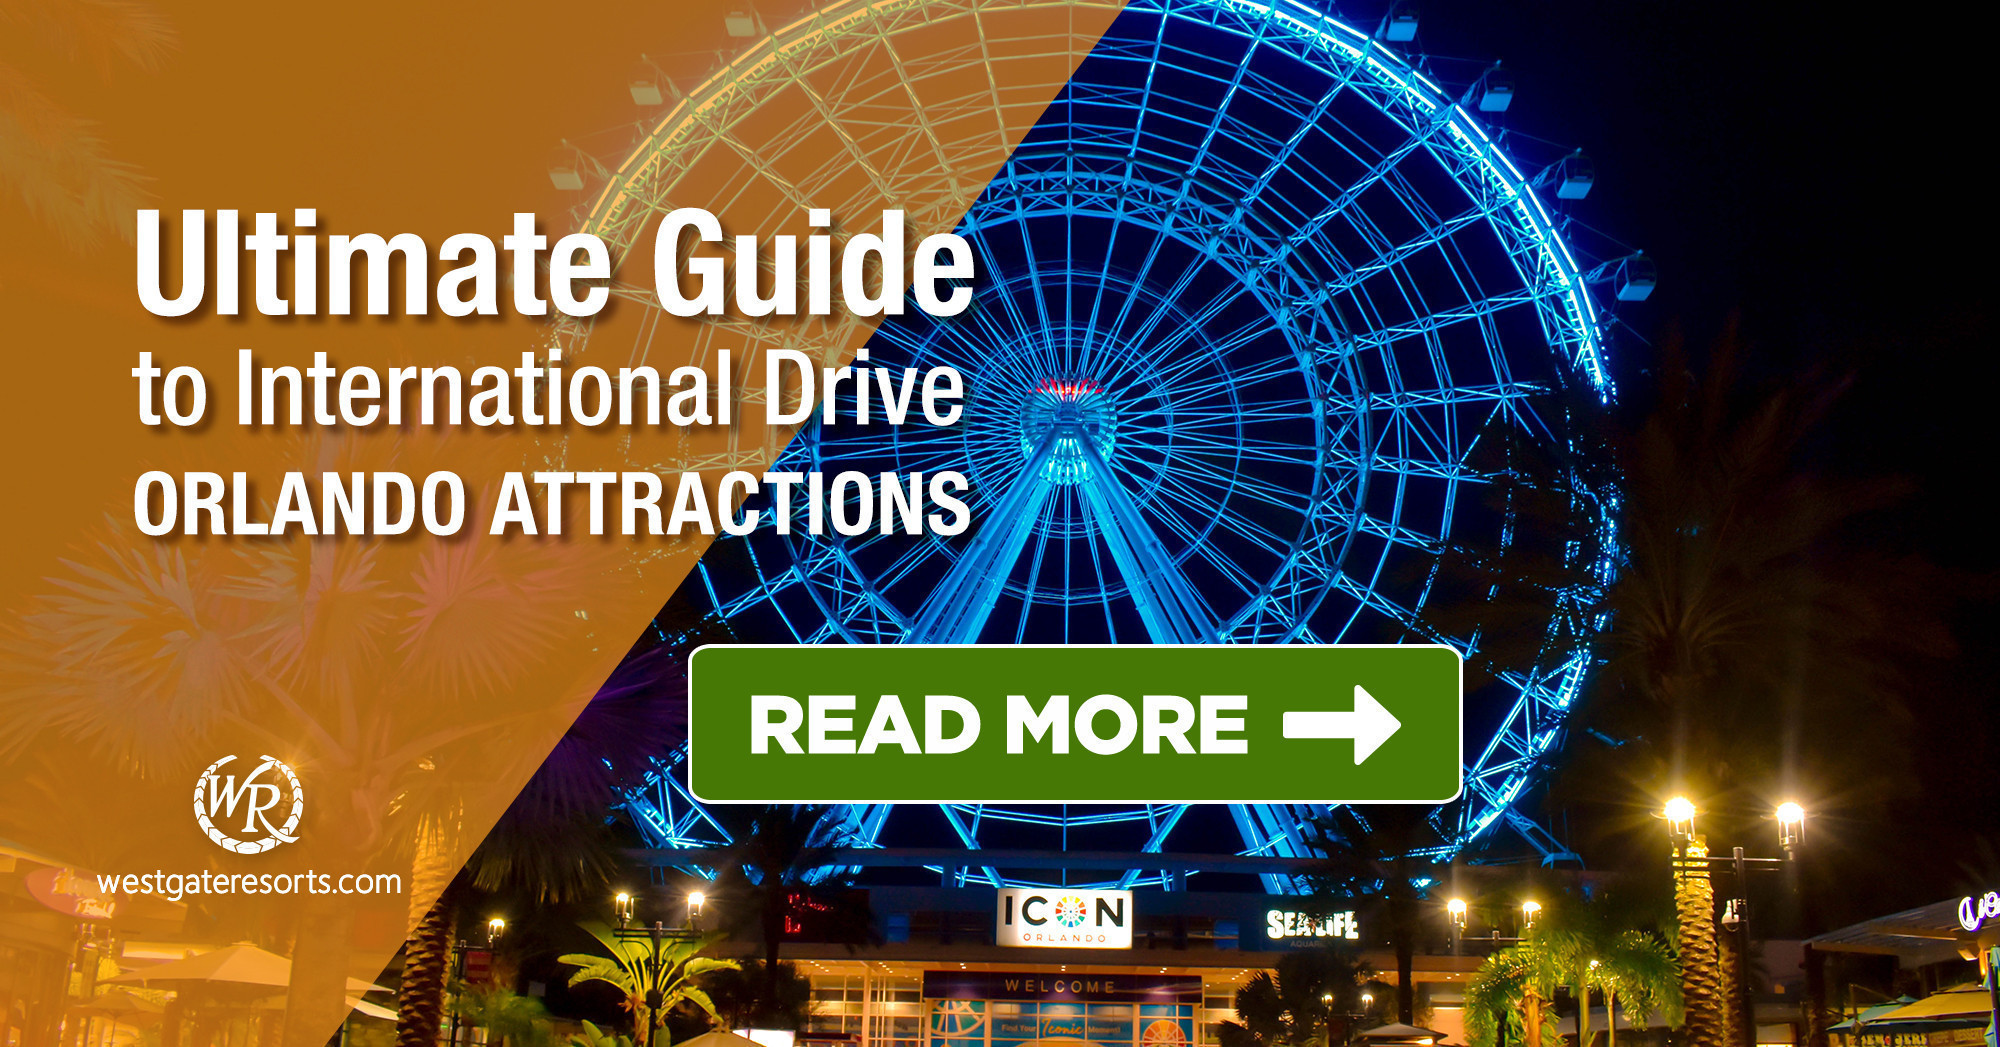 The Ultimate Guide to International Drive Orlando Attractions | Best Of I Drive Attractions, Food & Drinks